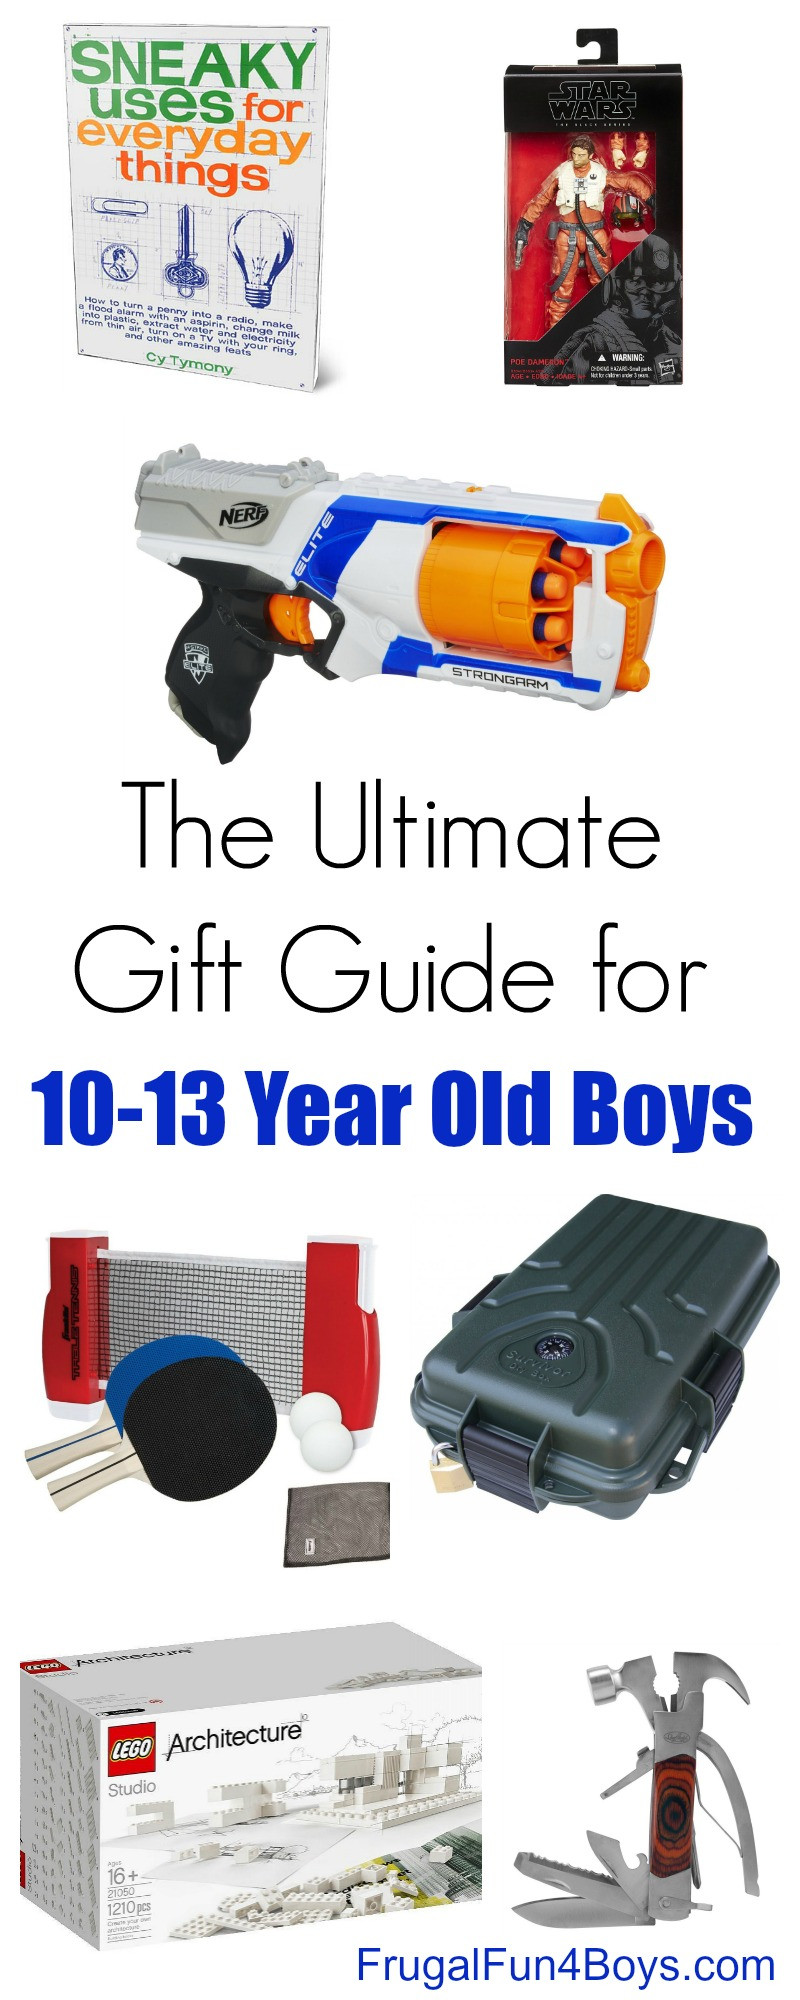 Gift Ideas 13 Year Old Boys
 Gift Ideas for 10 to 13 Year Old Boys Frugal Fun For